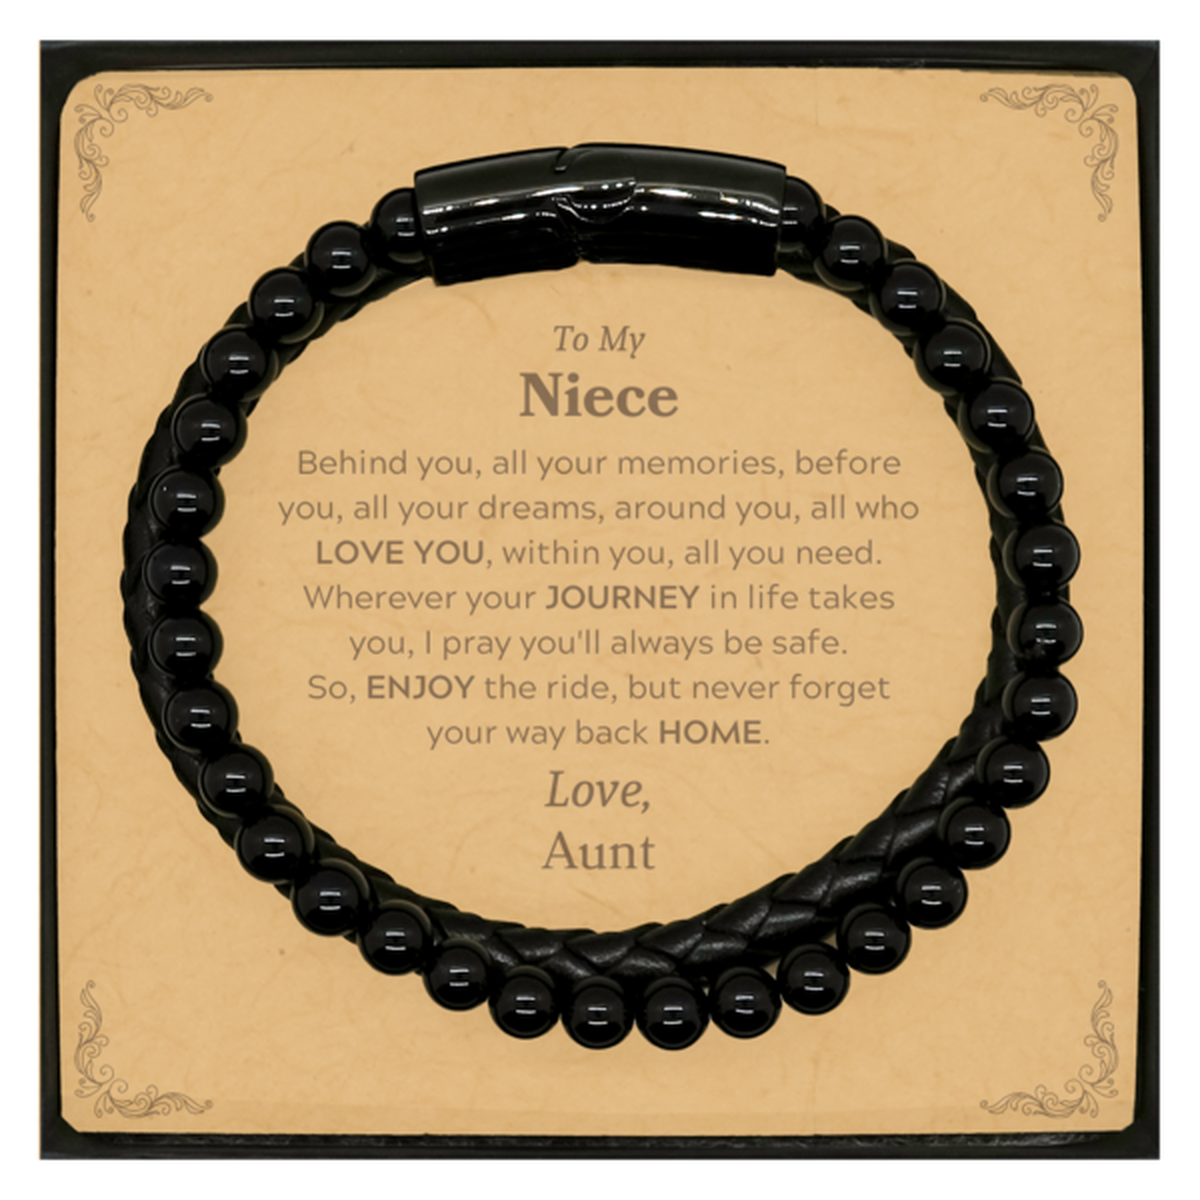 To My Niece Graduation Gifts from Aunt, Niece Stone Leather Bracelets Christmas Birthday Gifts for Niece Behind you, all your memories, before you, all your dreams. Love, Aunt